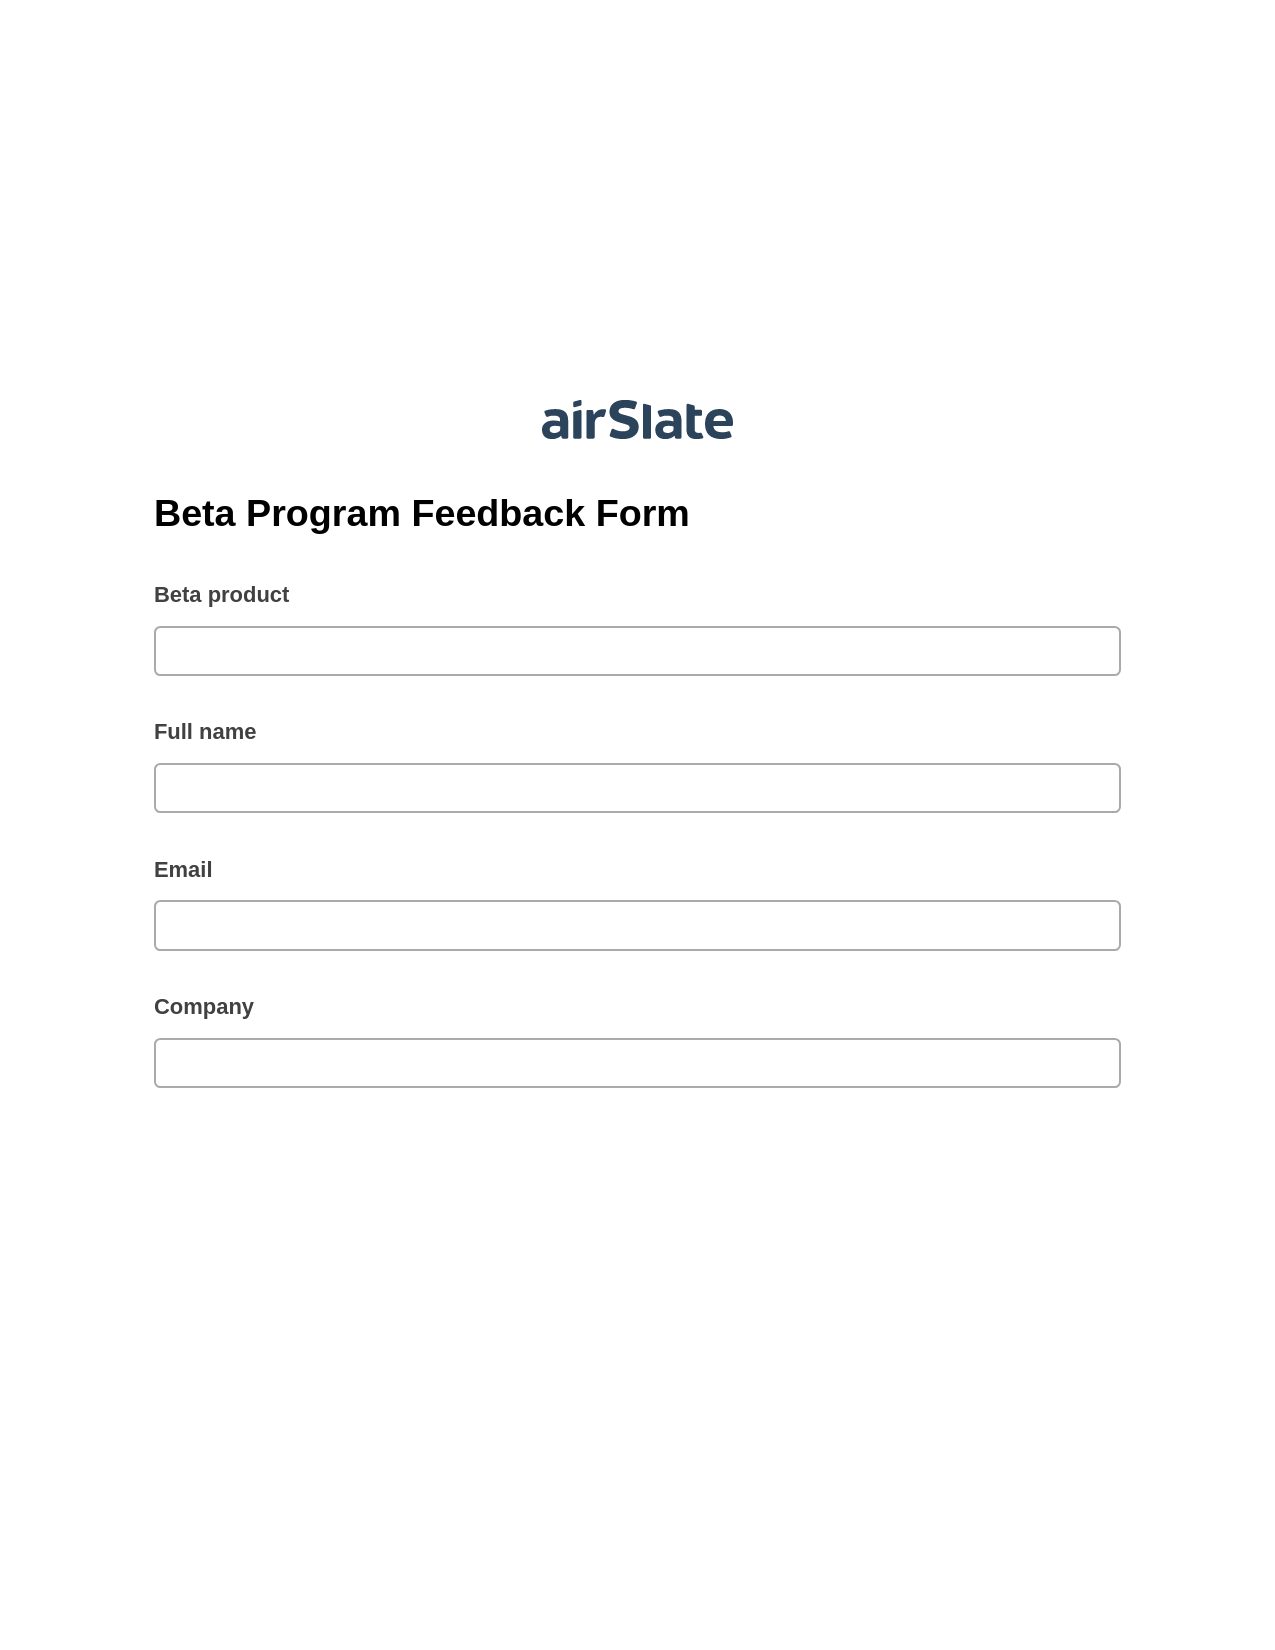 Multirole Beta Program Feedback Form Pre-fill from NetSuite Records Bot, Roles Reminder Bot, Export to Smartsheet